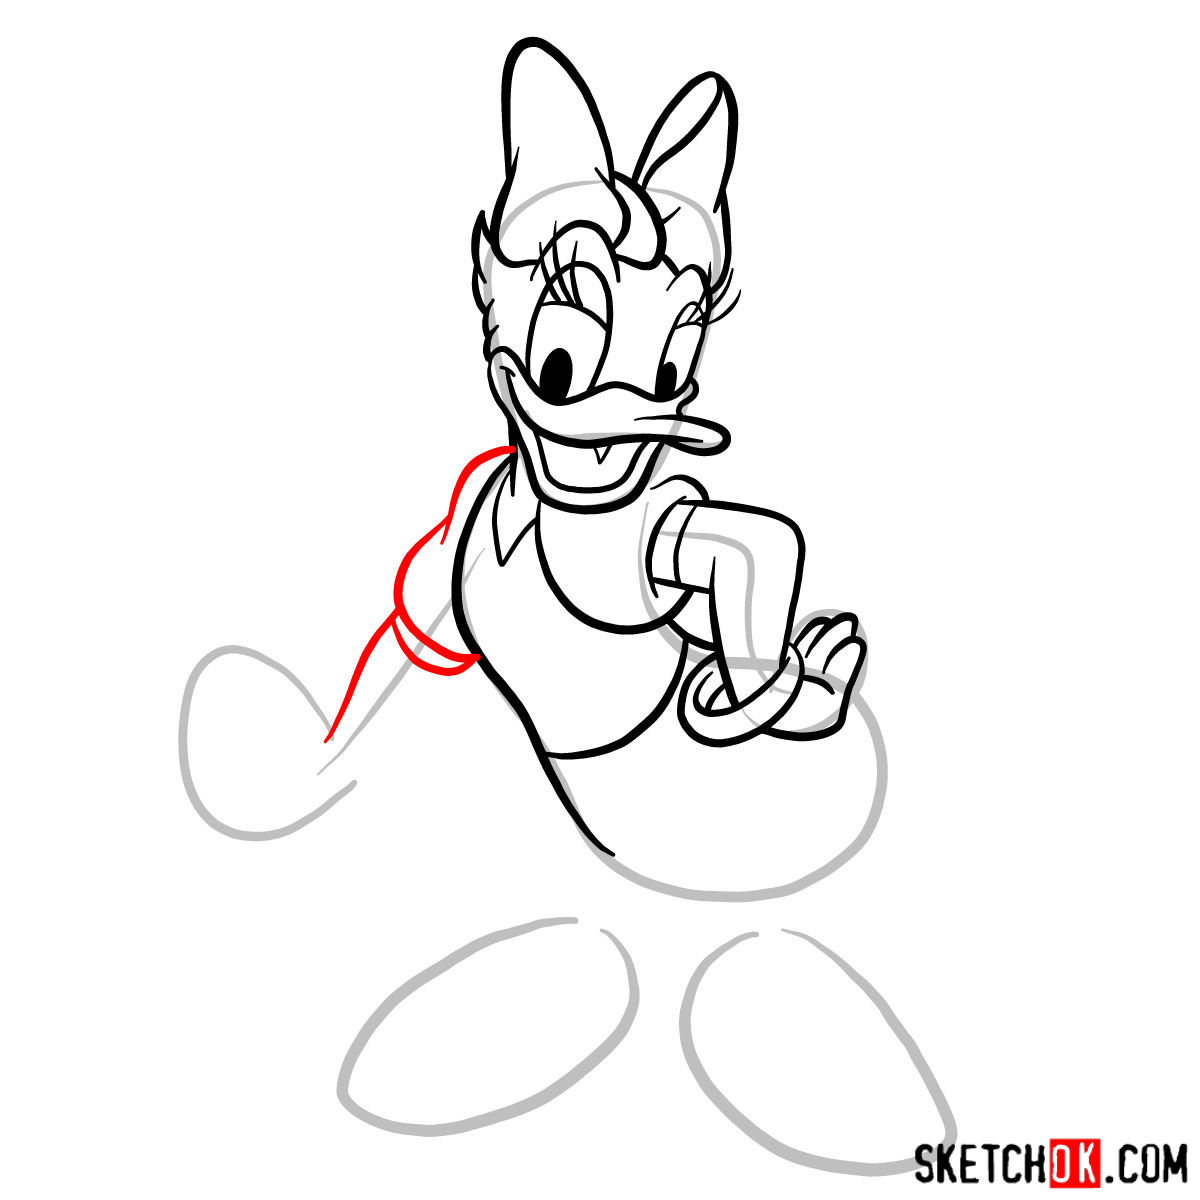 How to draw Daisy Duck - step 08